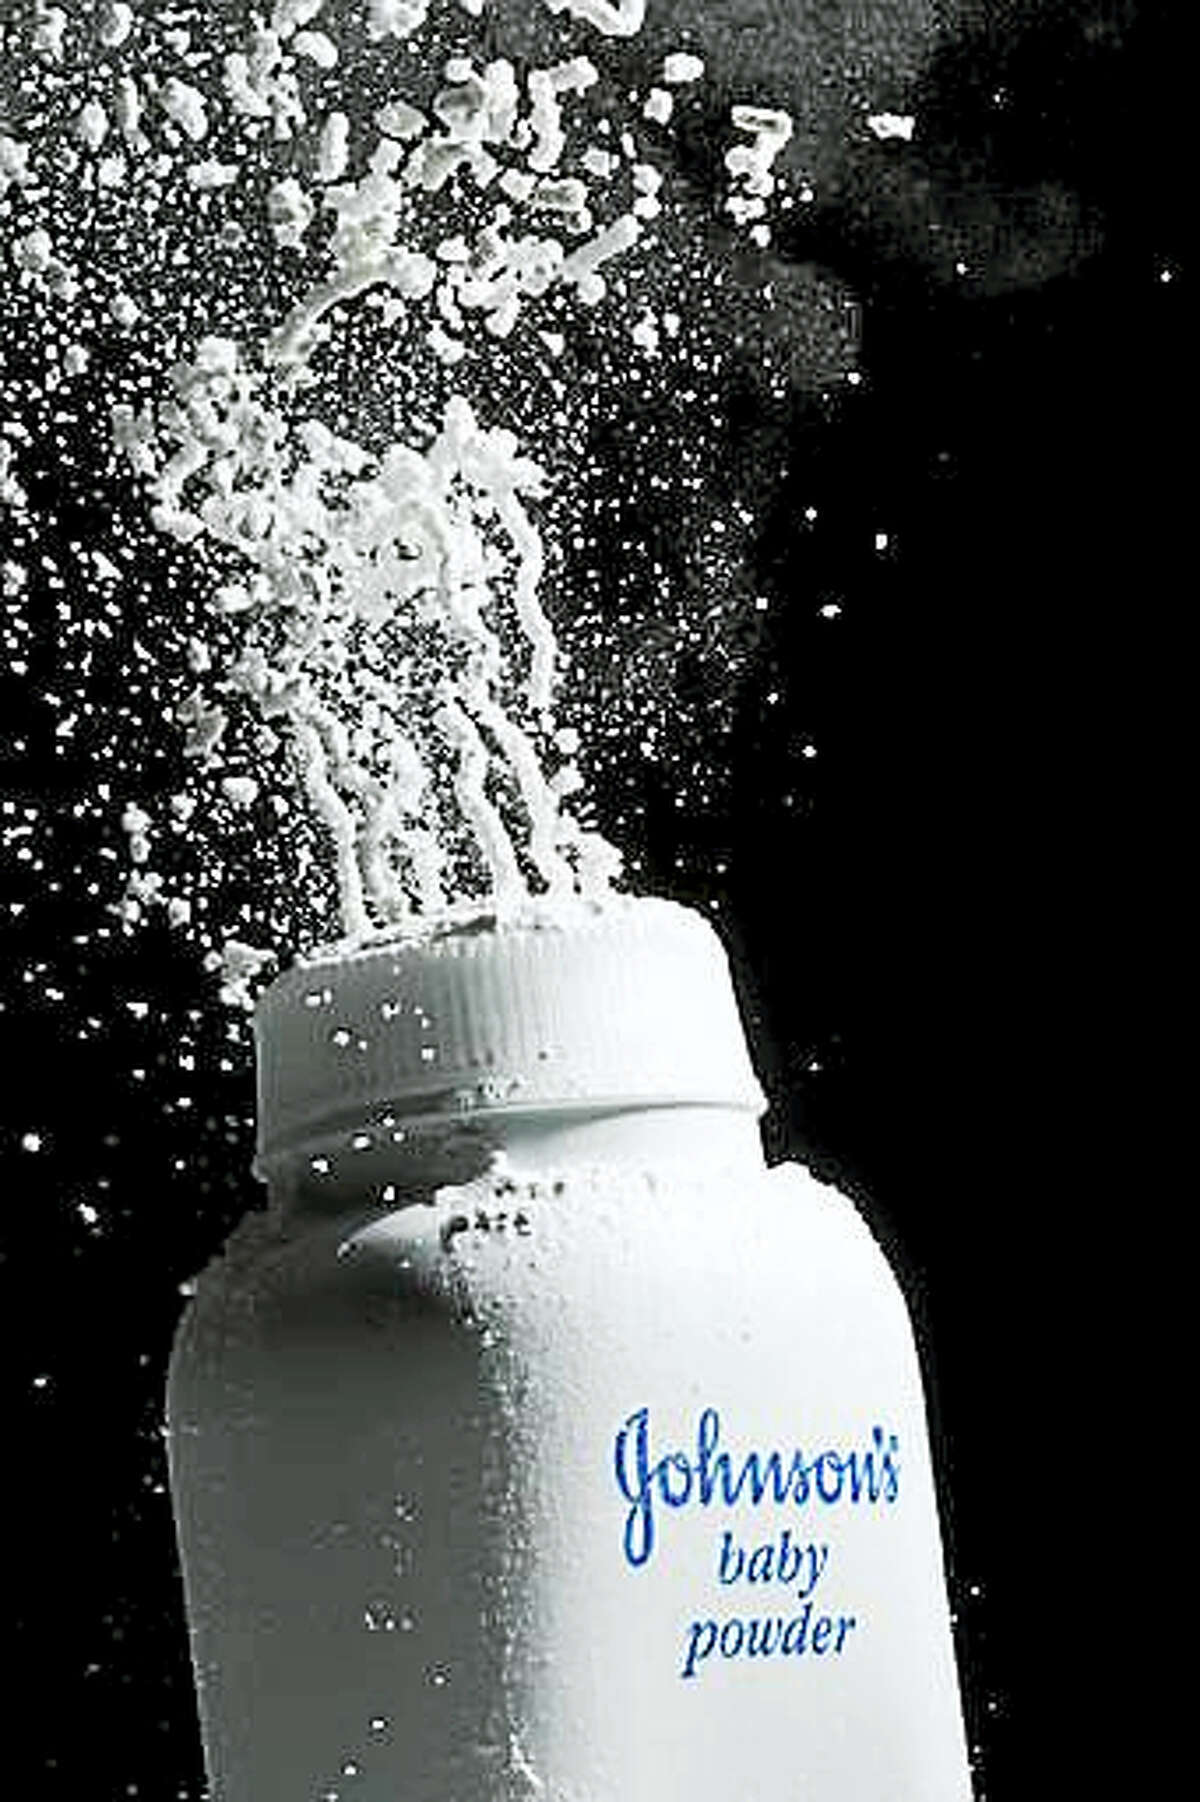 FILE - In this April 19, 2010 file photo, Johnson's Baby Powder is squeezed from its container to illustrate the product, in Philadelphia. A St. Louis jury has ordered Johnson & Johnson to pay a second huge award over claims that its talcum powder causes cancer. The company was ordered Monday, May 2, 2016 to pay a multi- million settlement to a South Dakota woman who blamed her ovarian cancer on years of baby powder use.